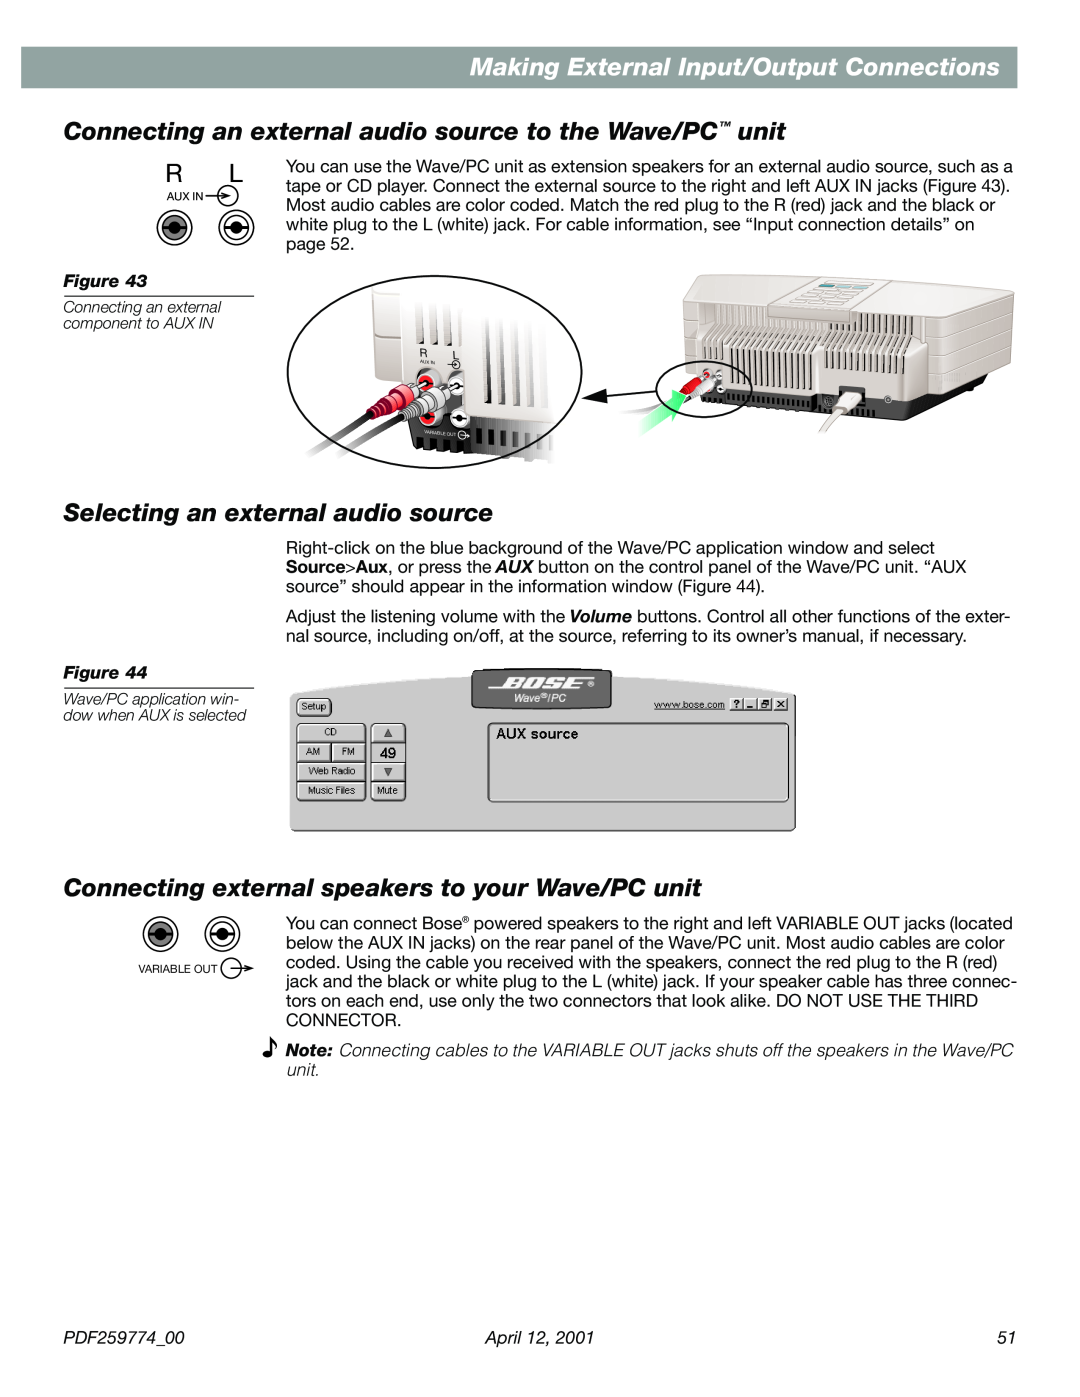 Bose PDF259774_00 manual Making External Input/Output Connections, Connecting an external audio source to the Wave/PC unit 